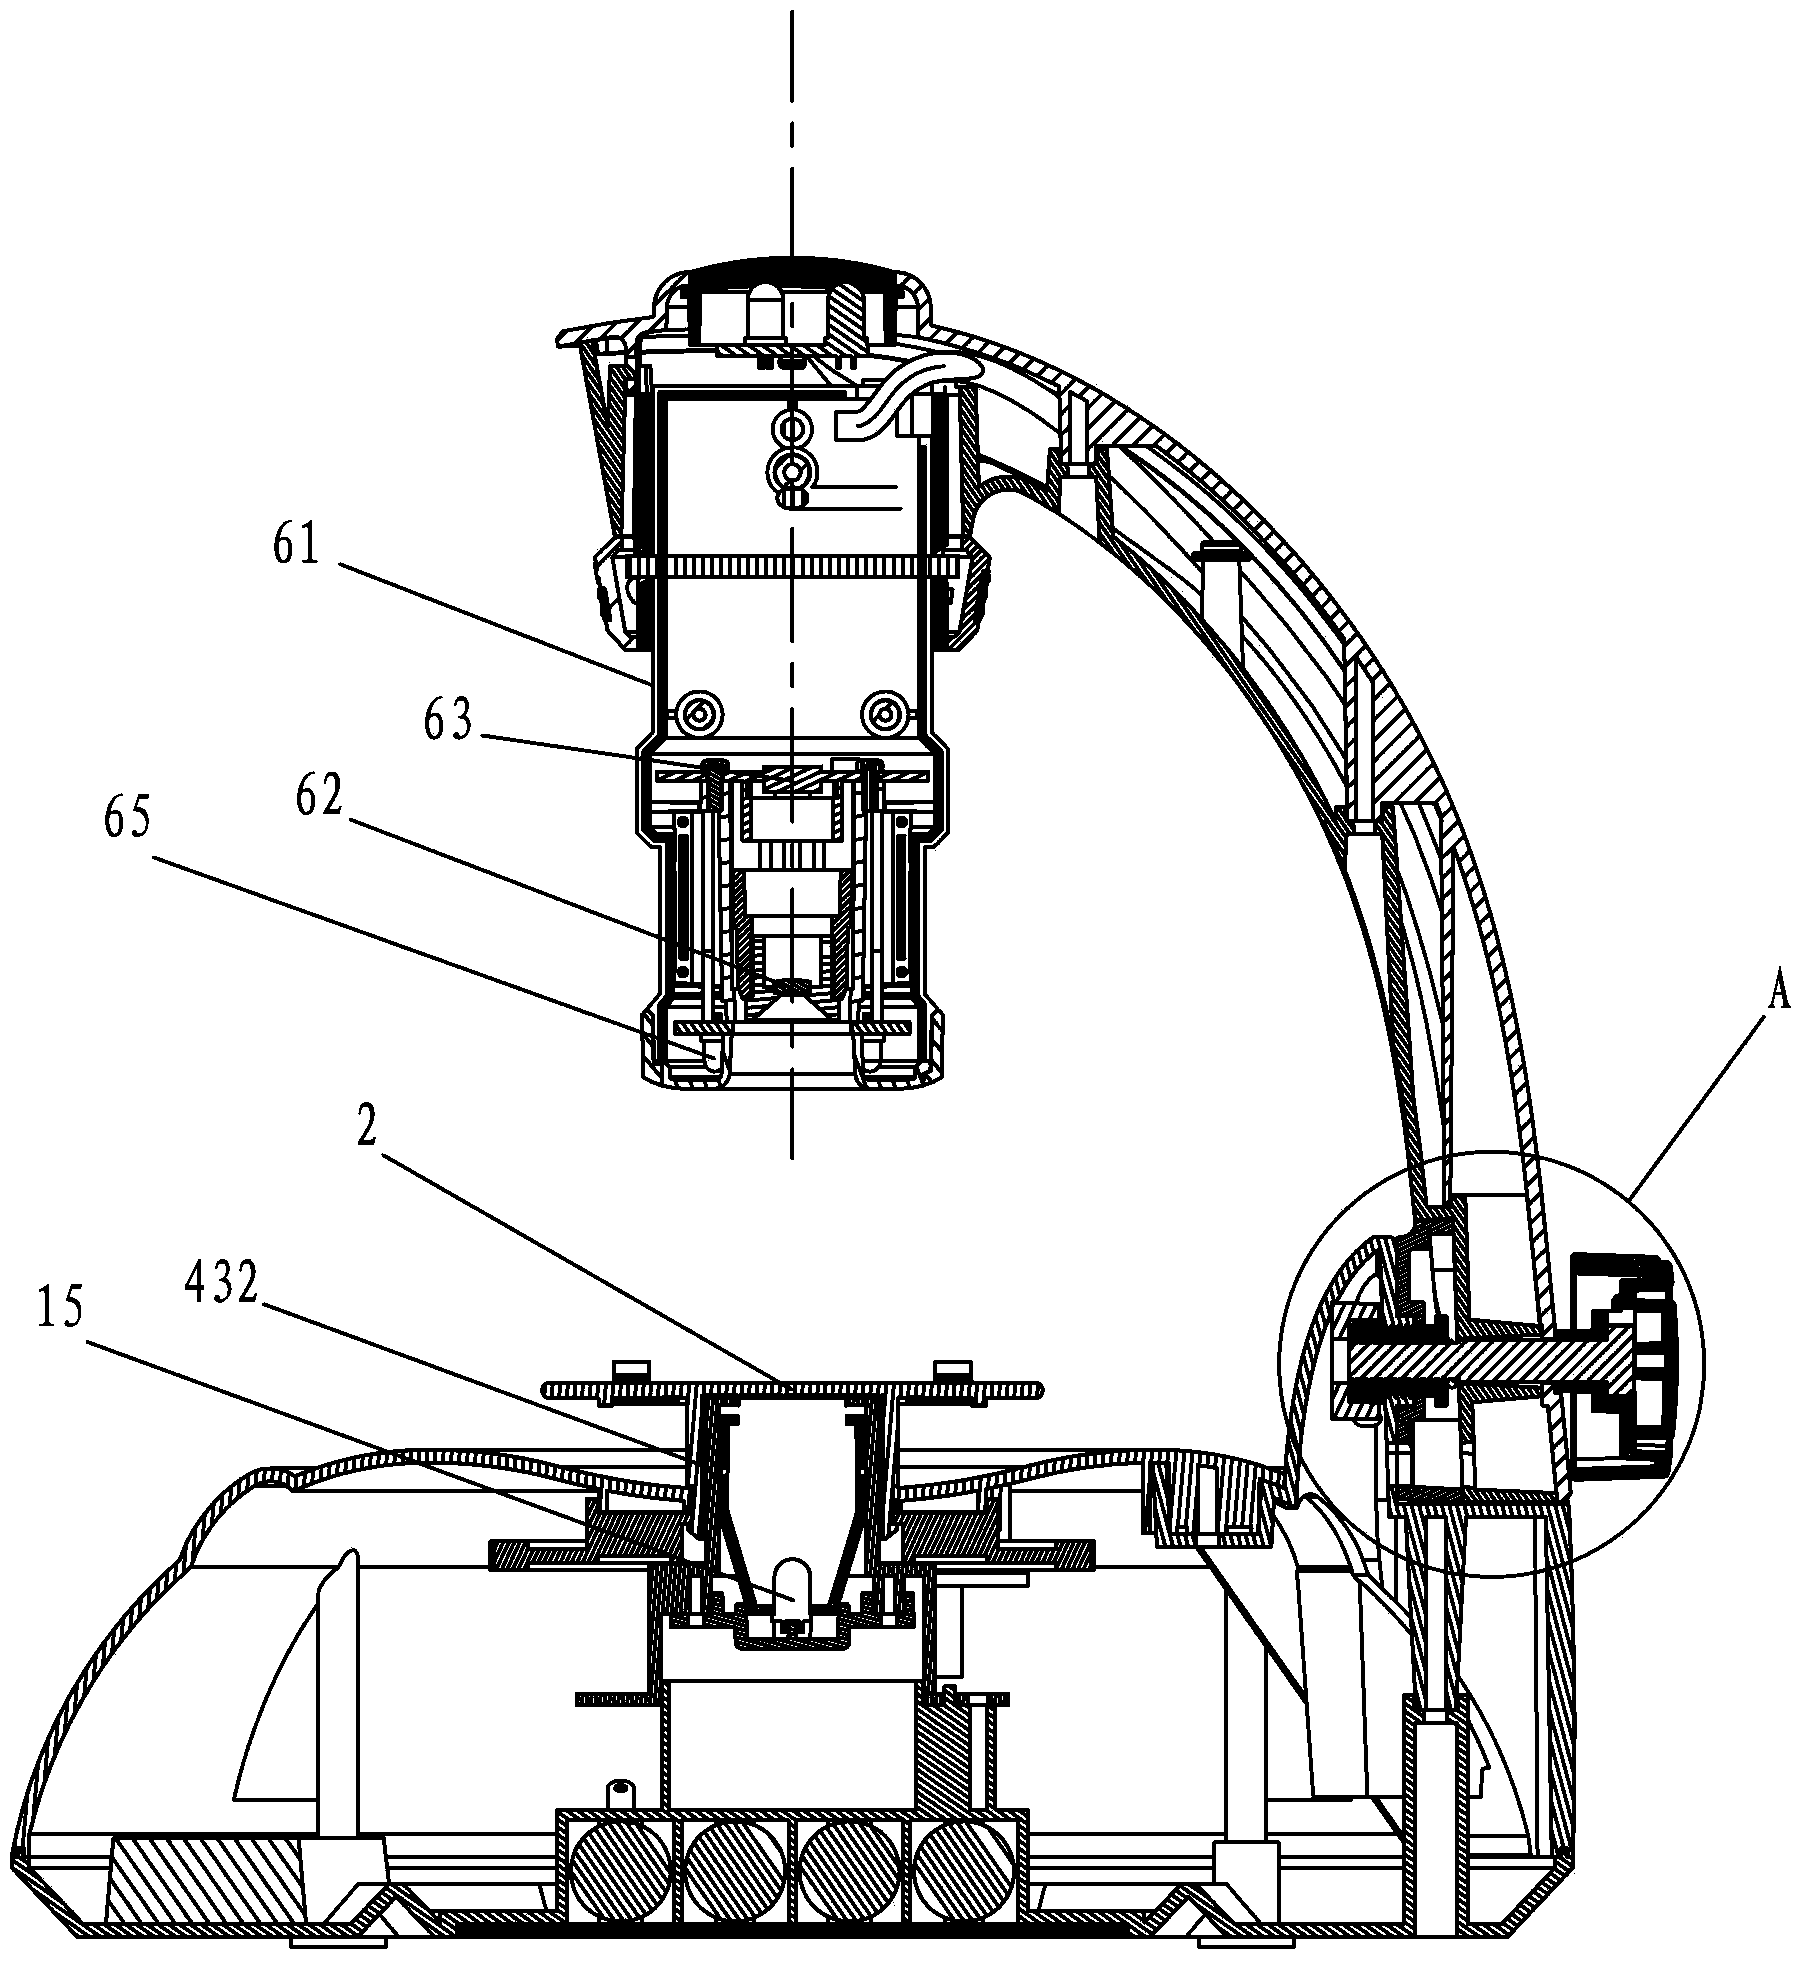 Microscope device capable of observing object to be tested at multiple angles